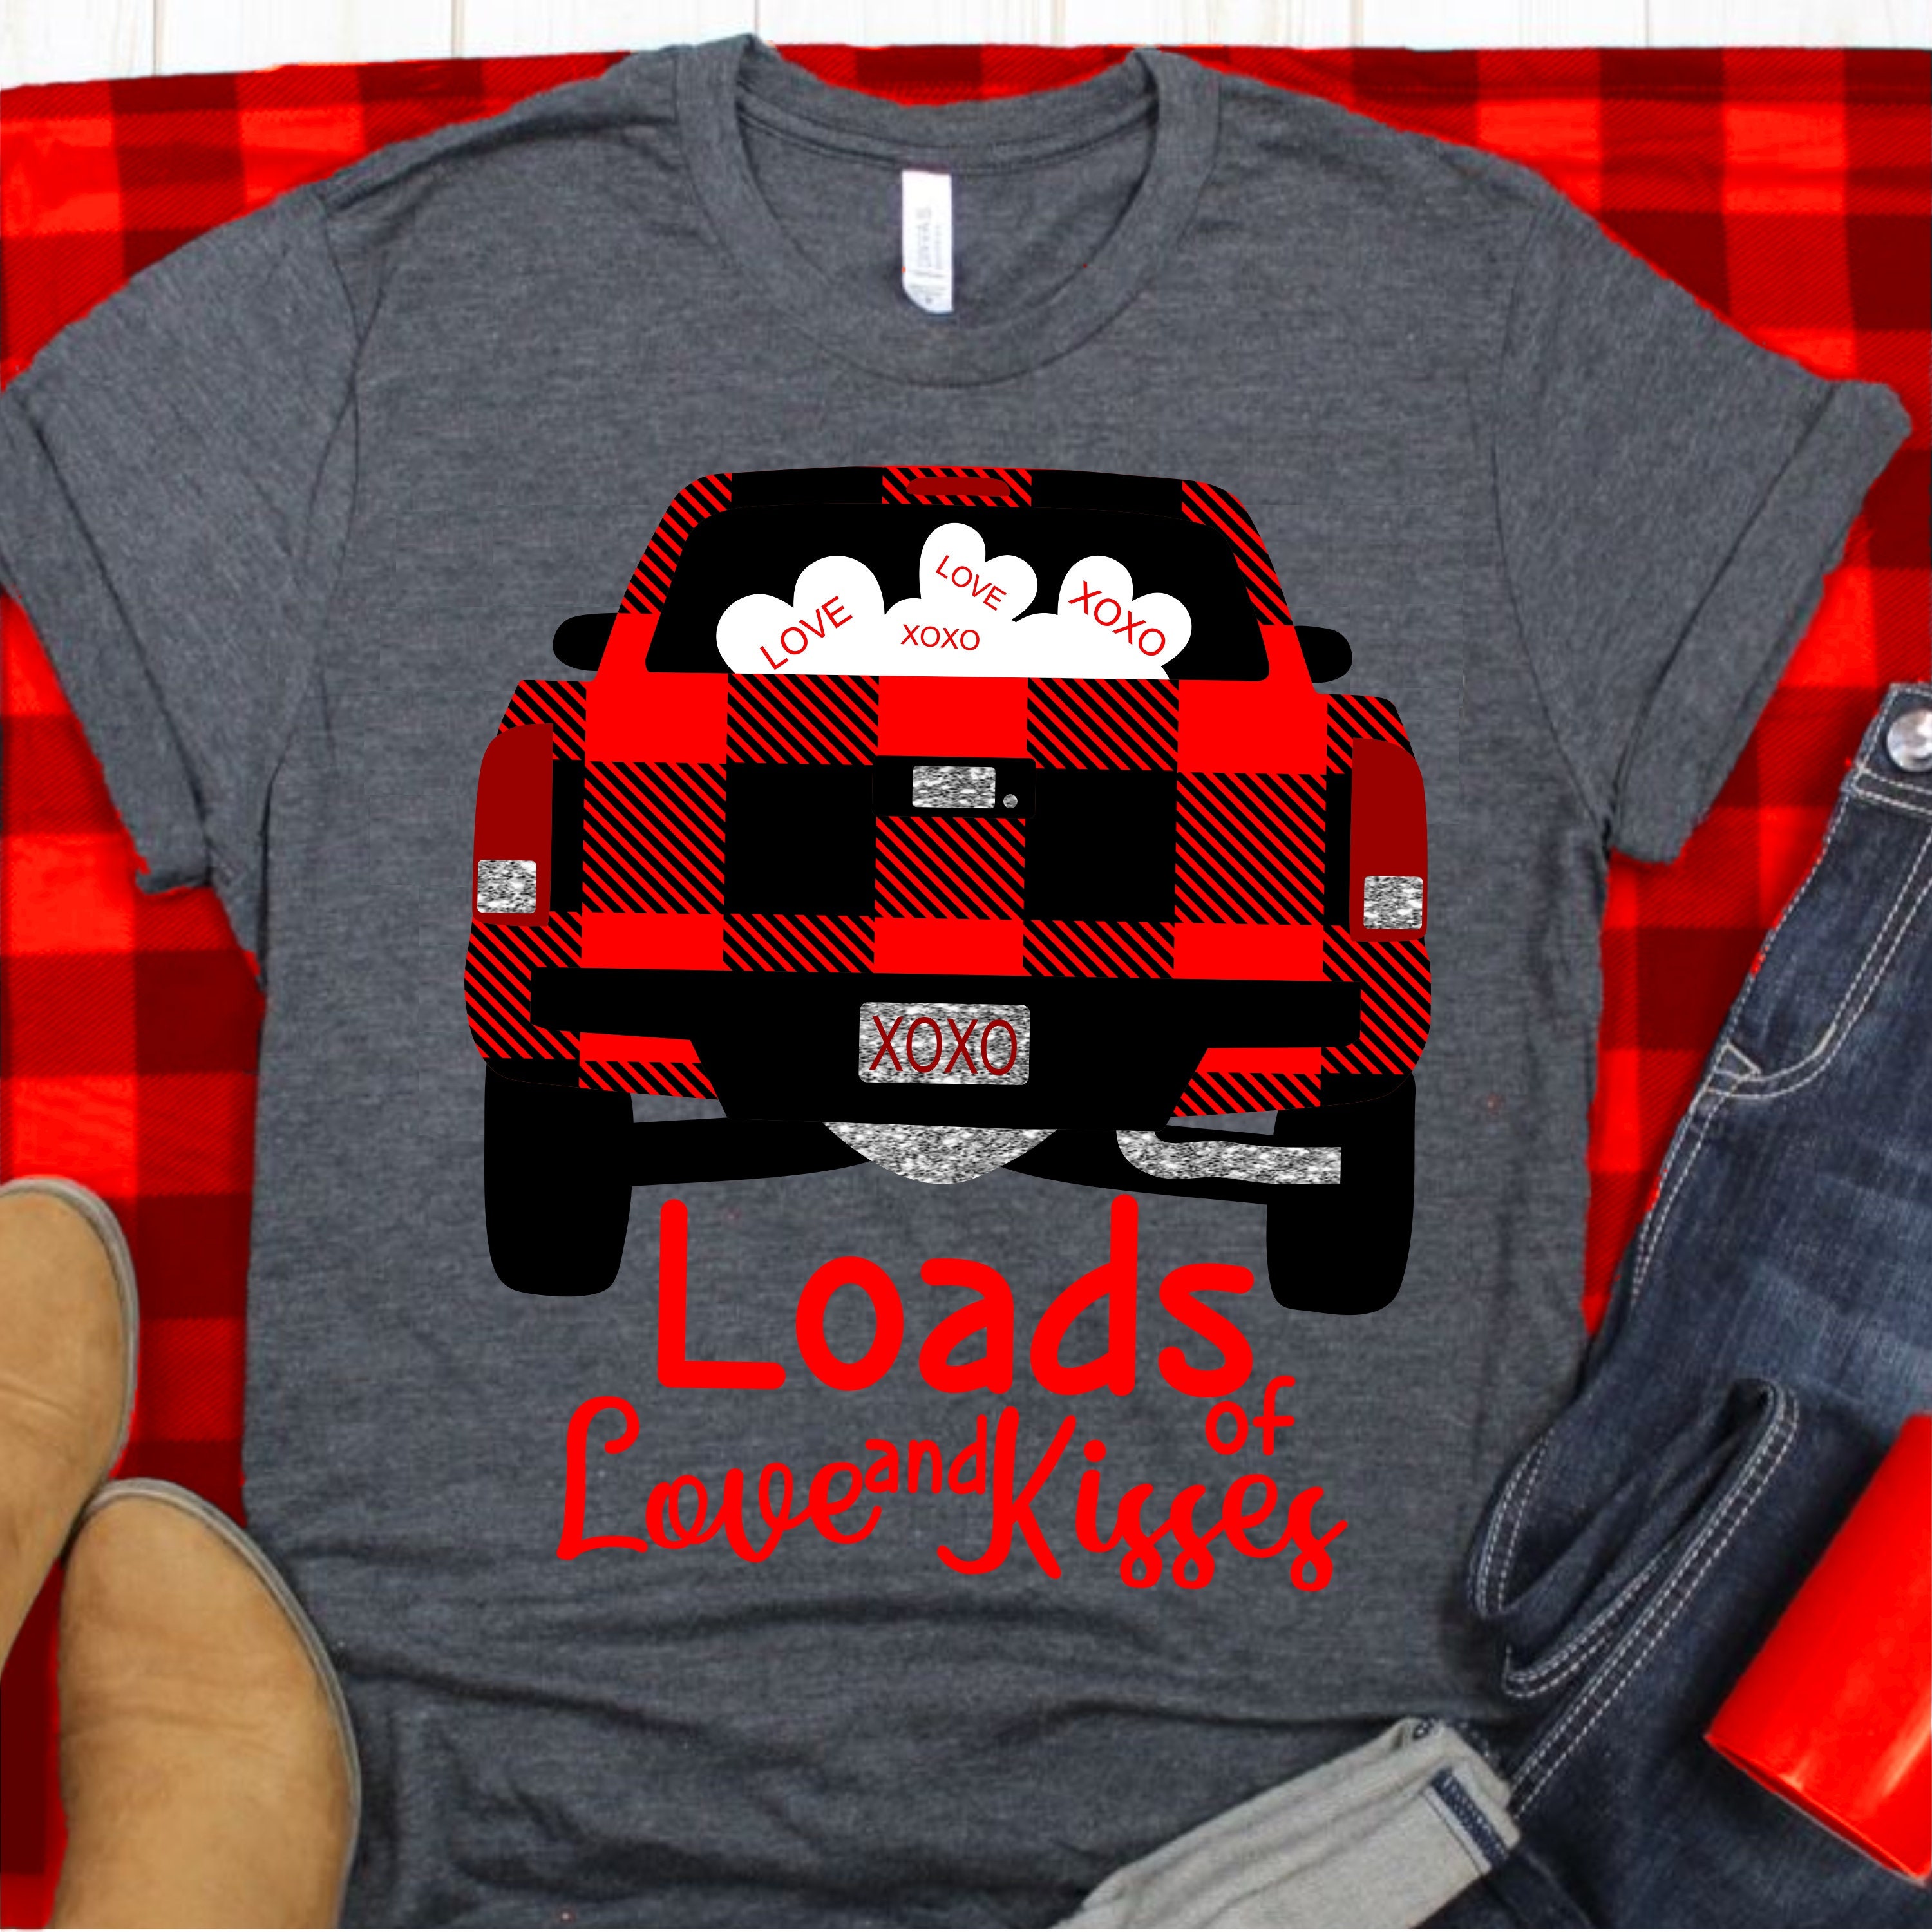 Download plaid print, loads of love truck svg, eps, dxf,Files for ...